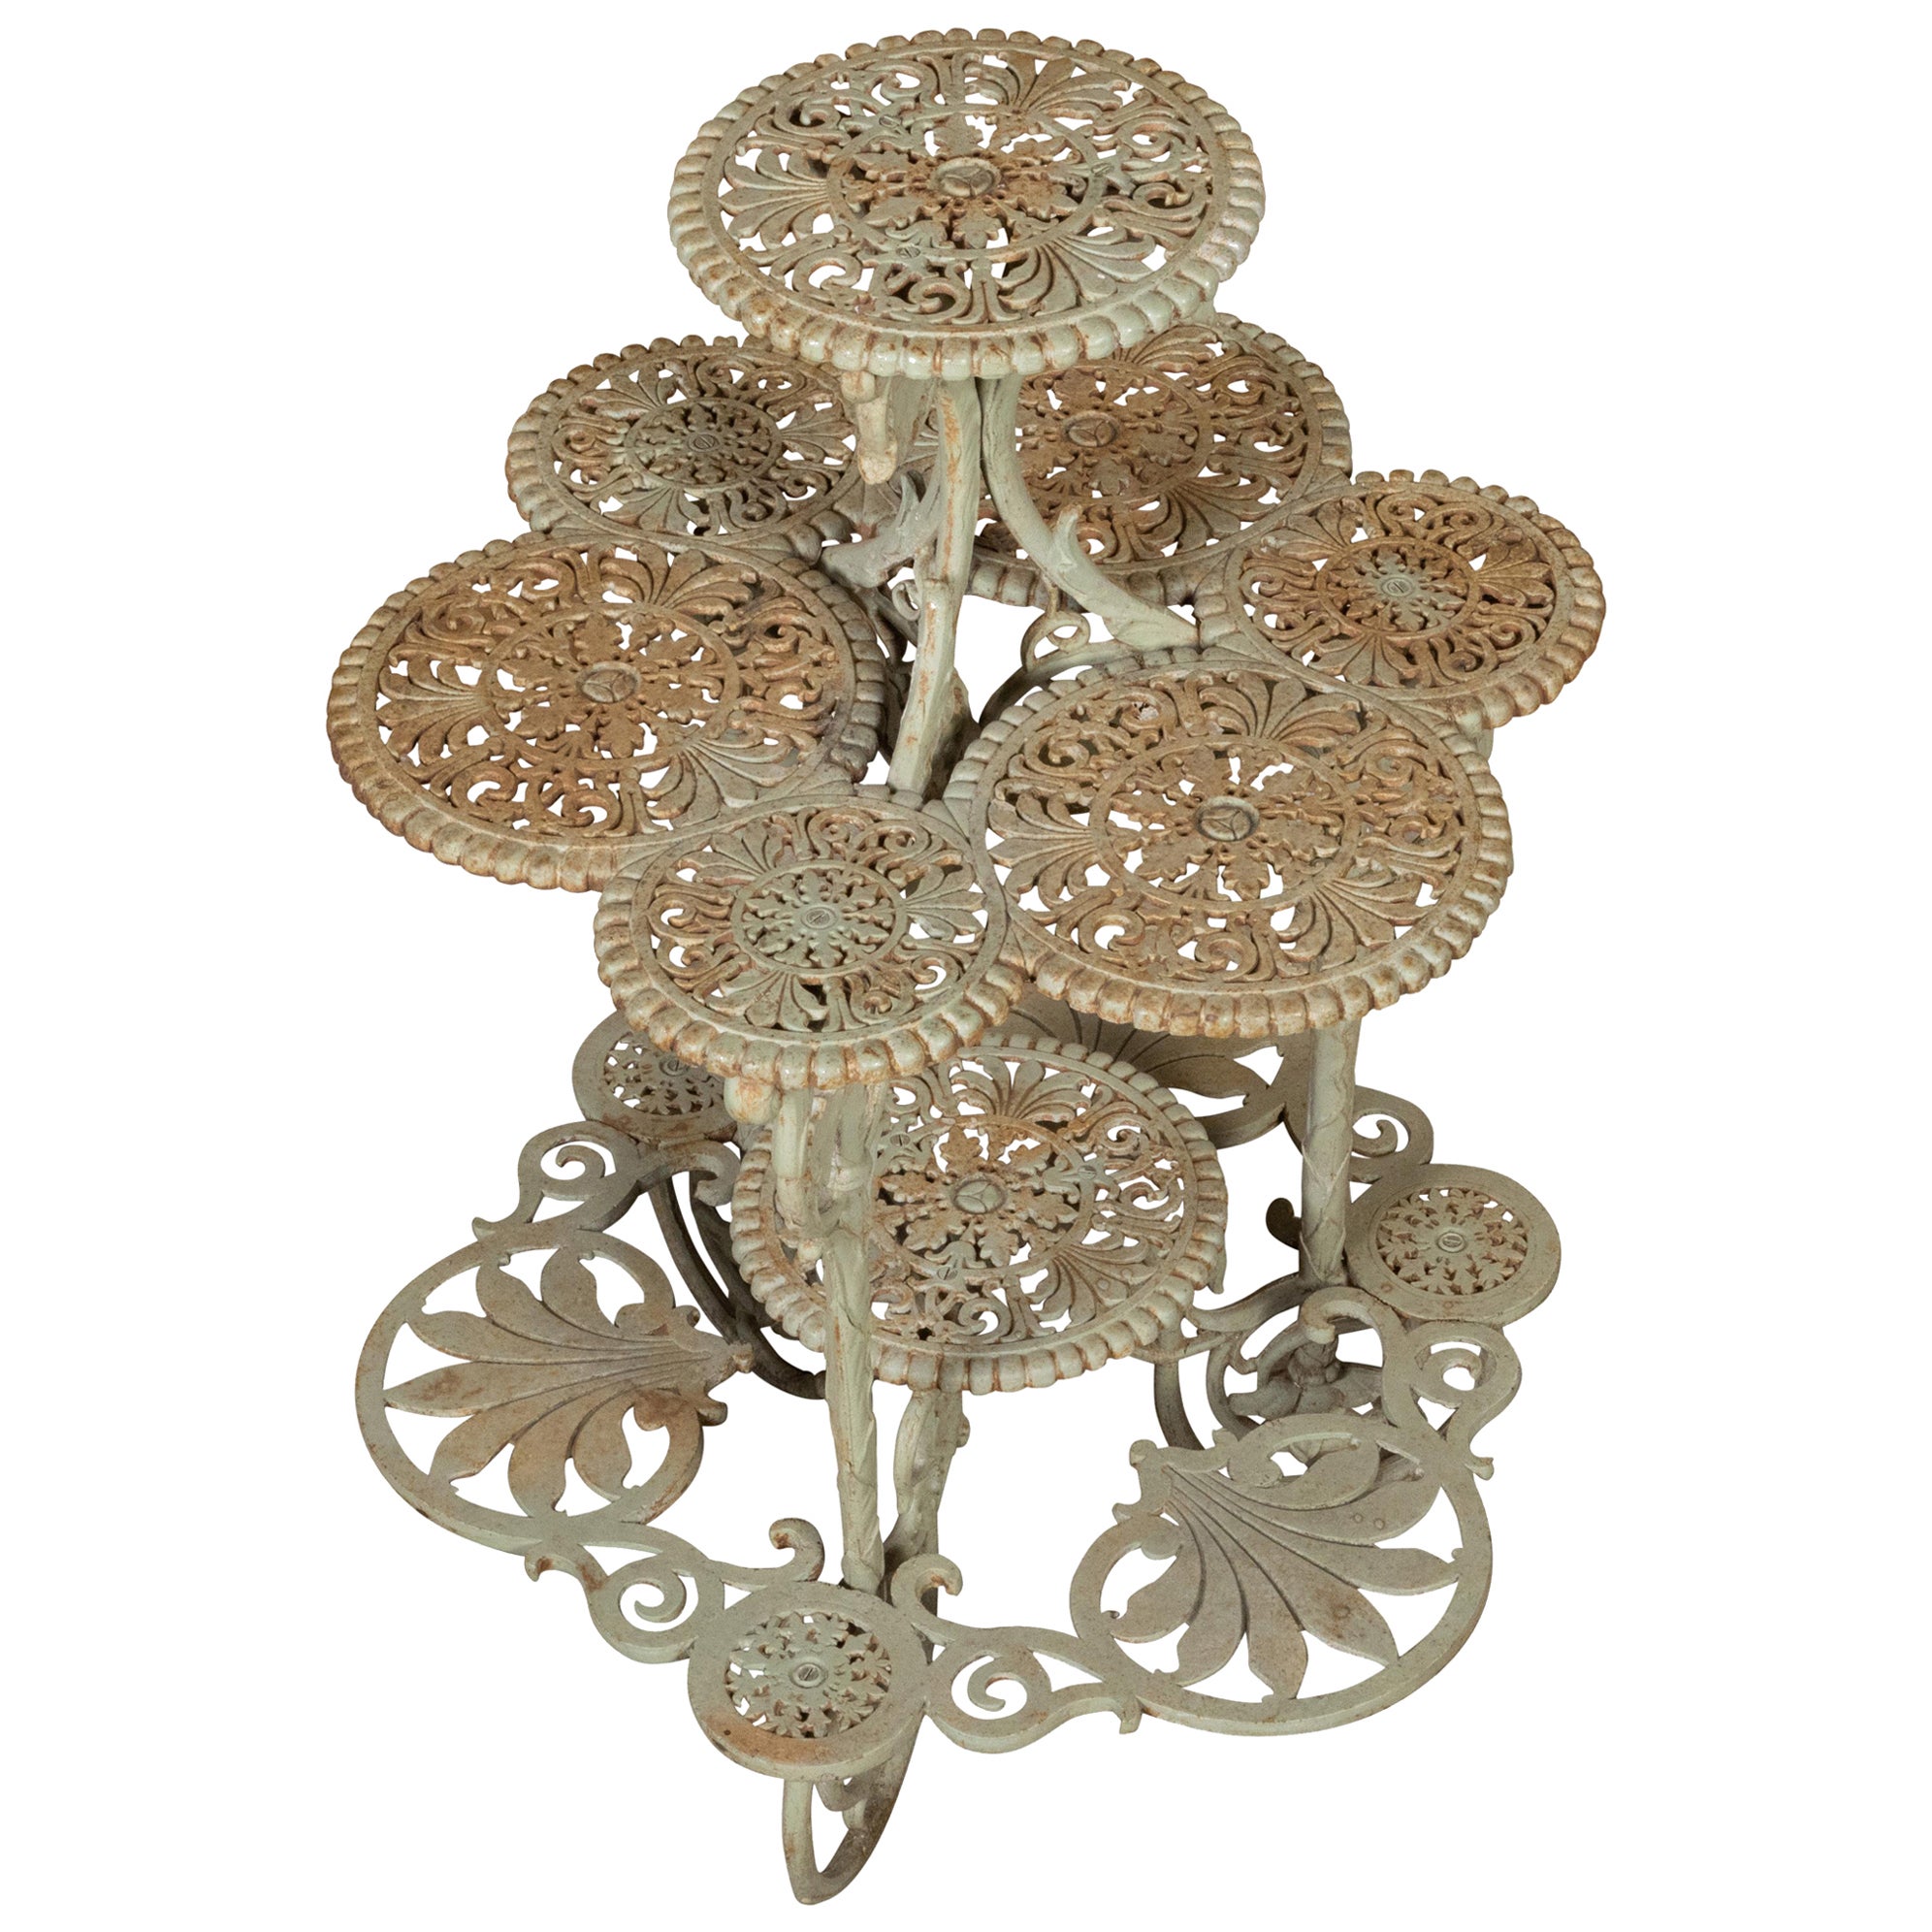 English 19th Century Painted Iron Four-Tiered Table with Foliage Openwork Motifs For Sale